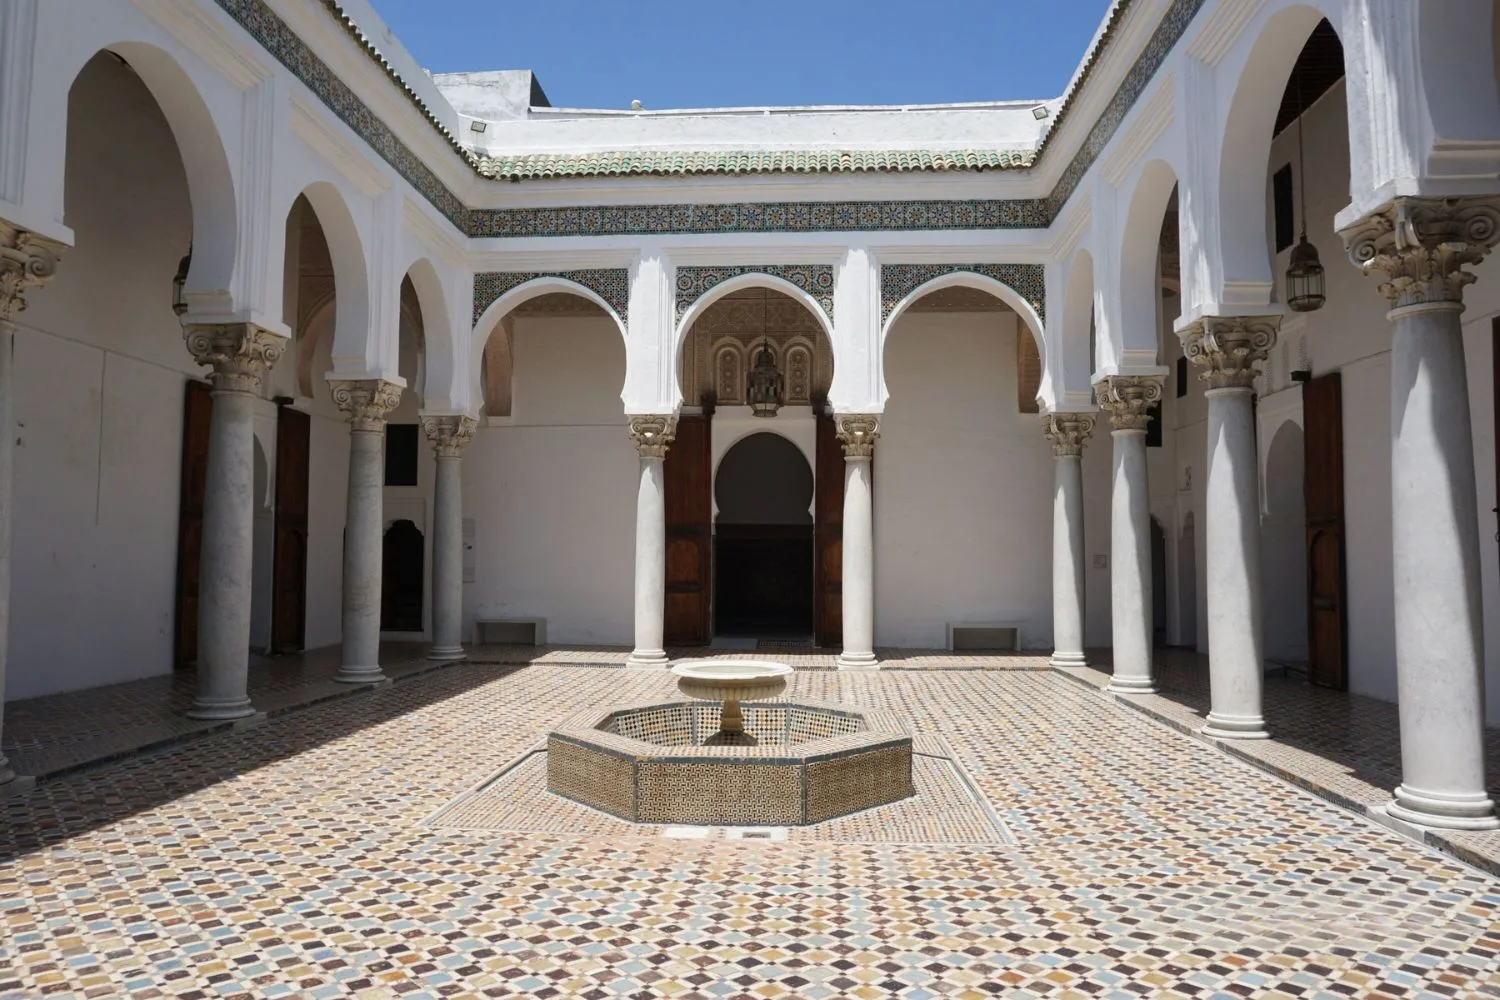 Inside the Museum of Moroccan Arts in Tangier, Morocco